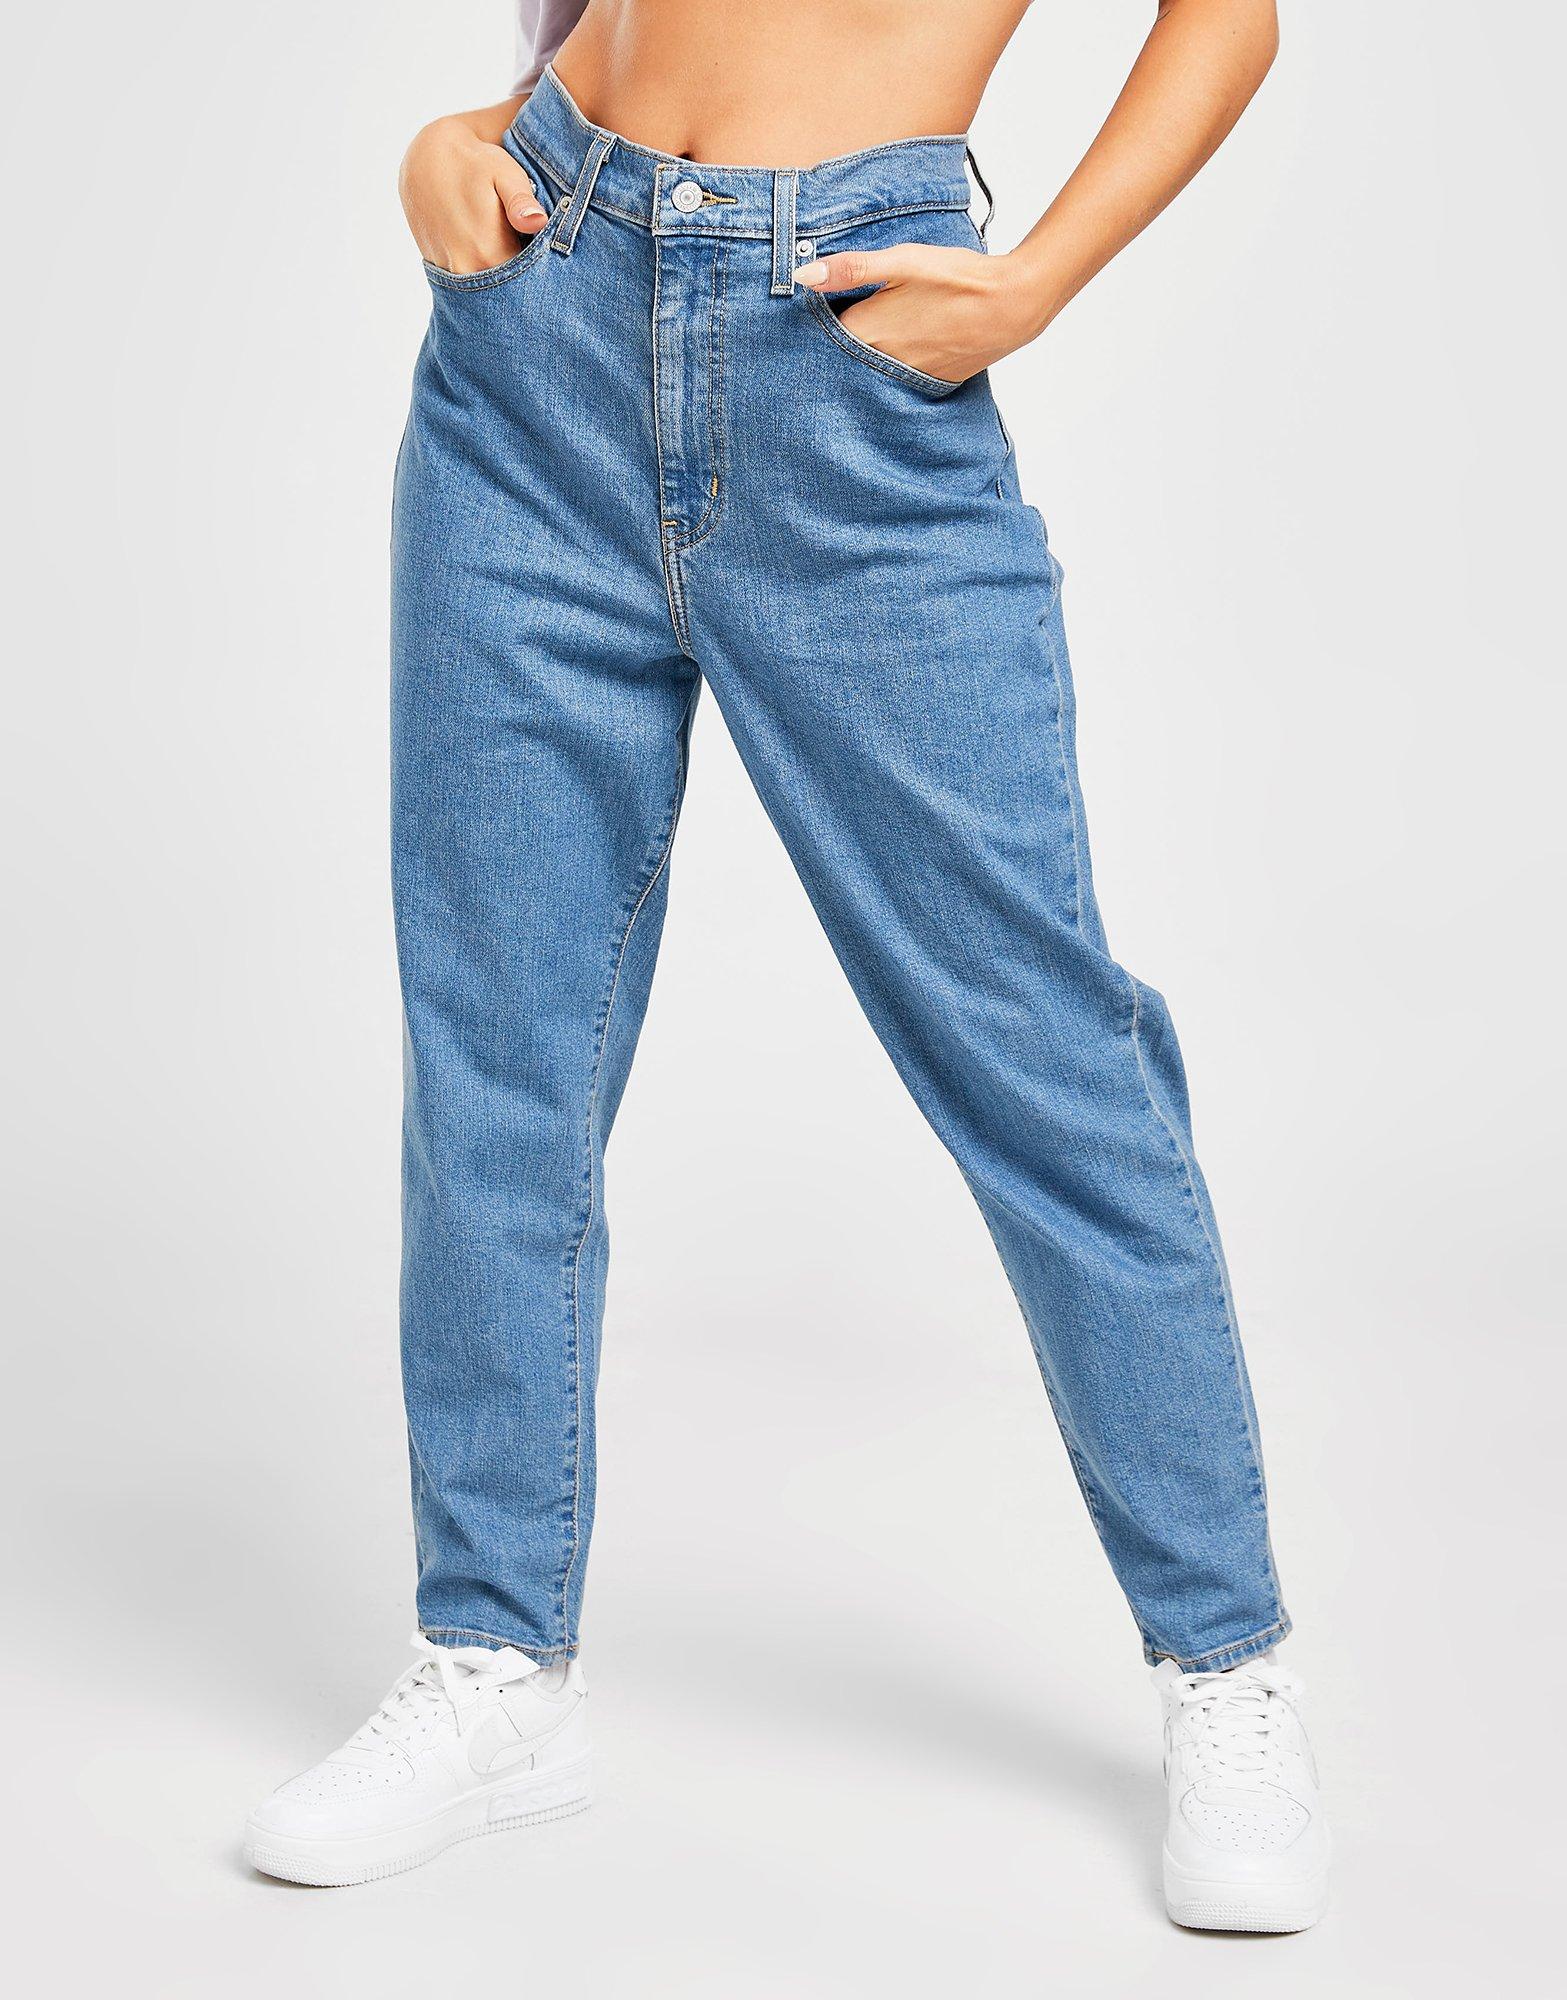 levis mom jeans uk